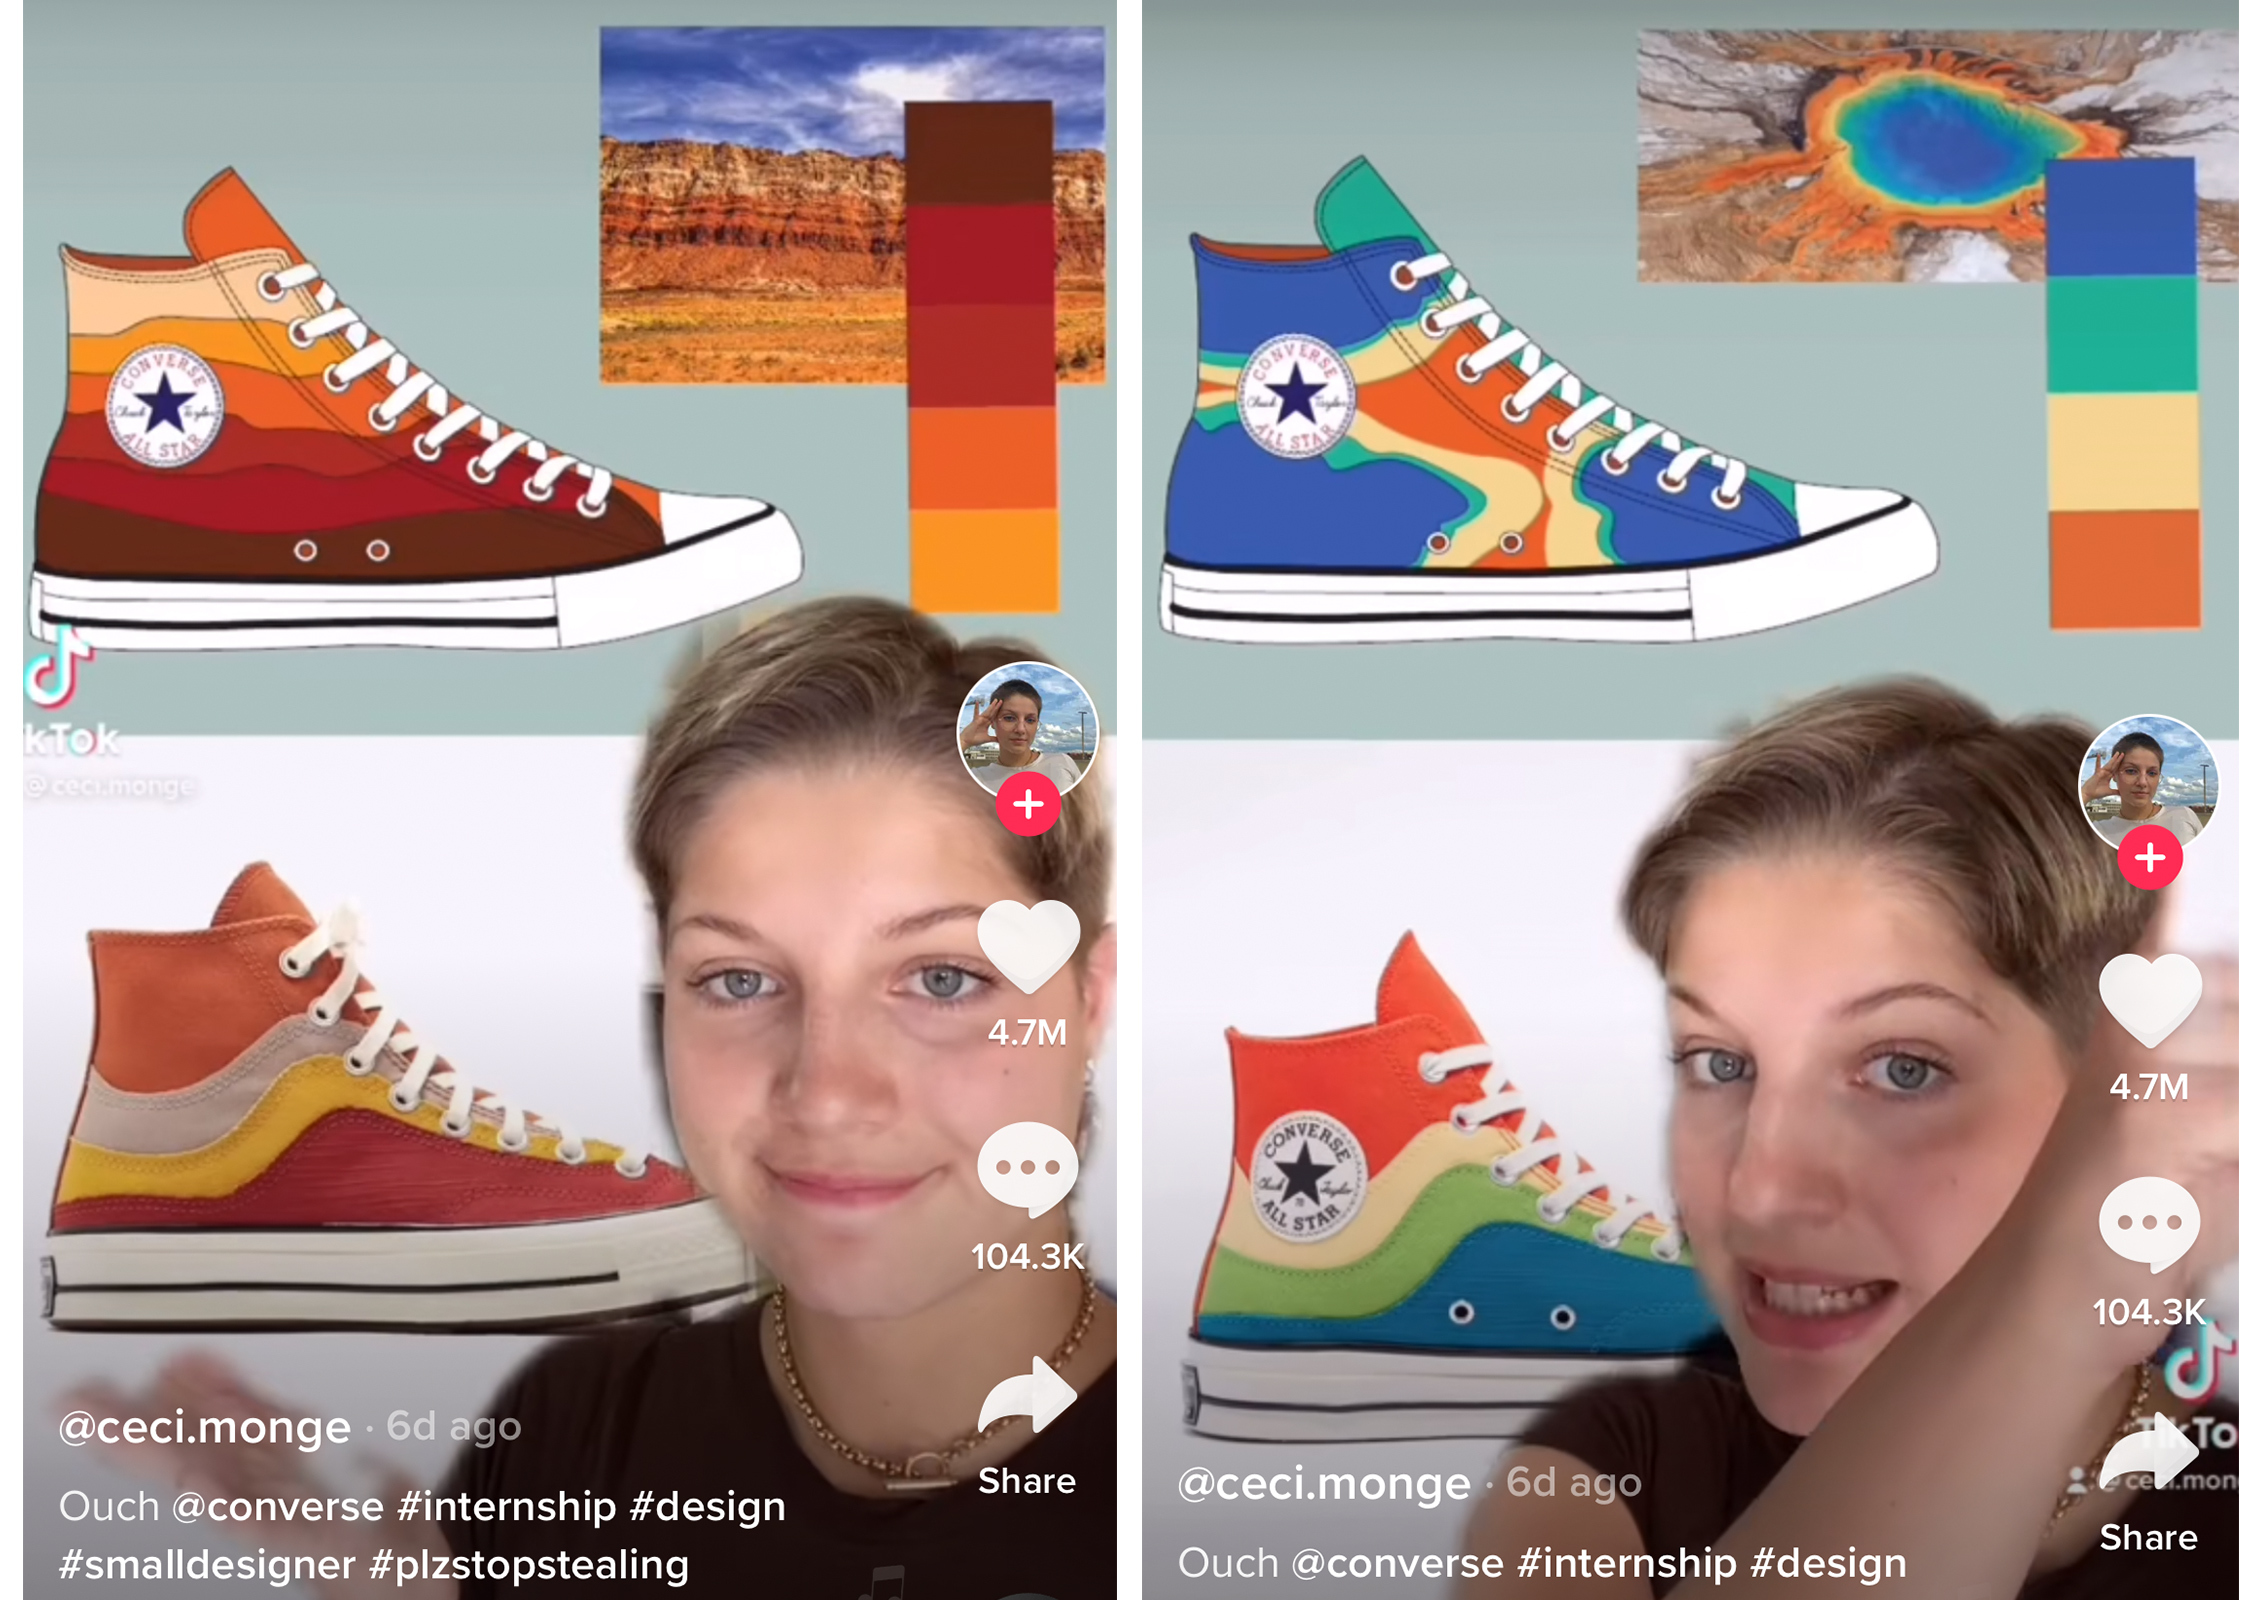 Converse TikTok Controversy Shows Difficulty of Design Protection | Time